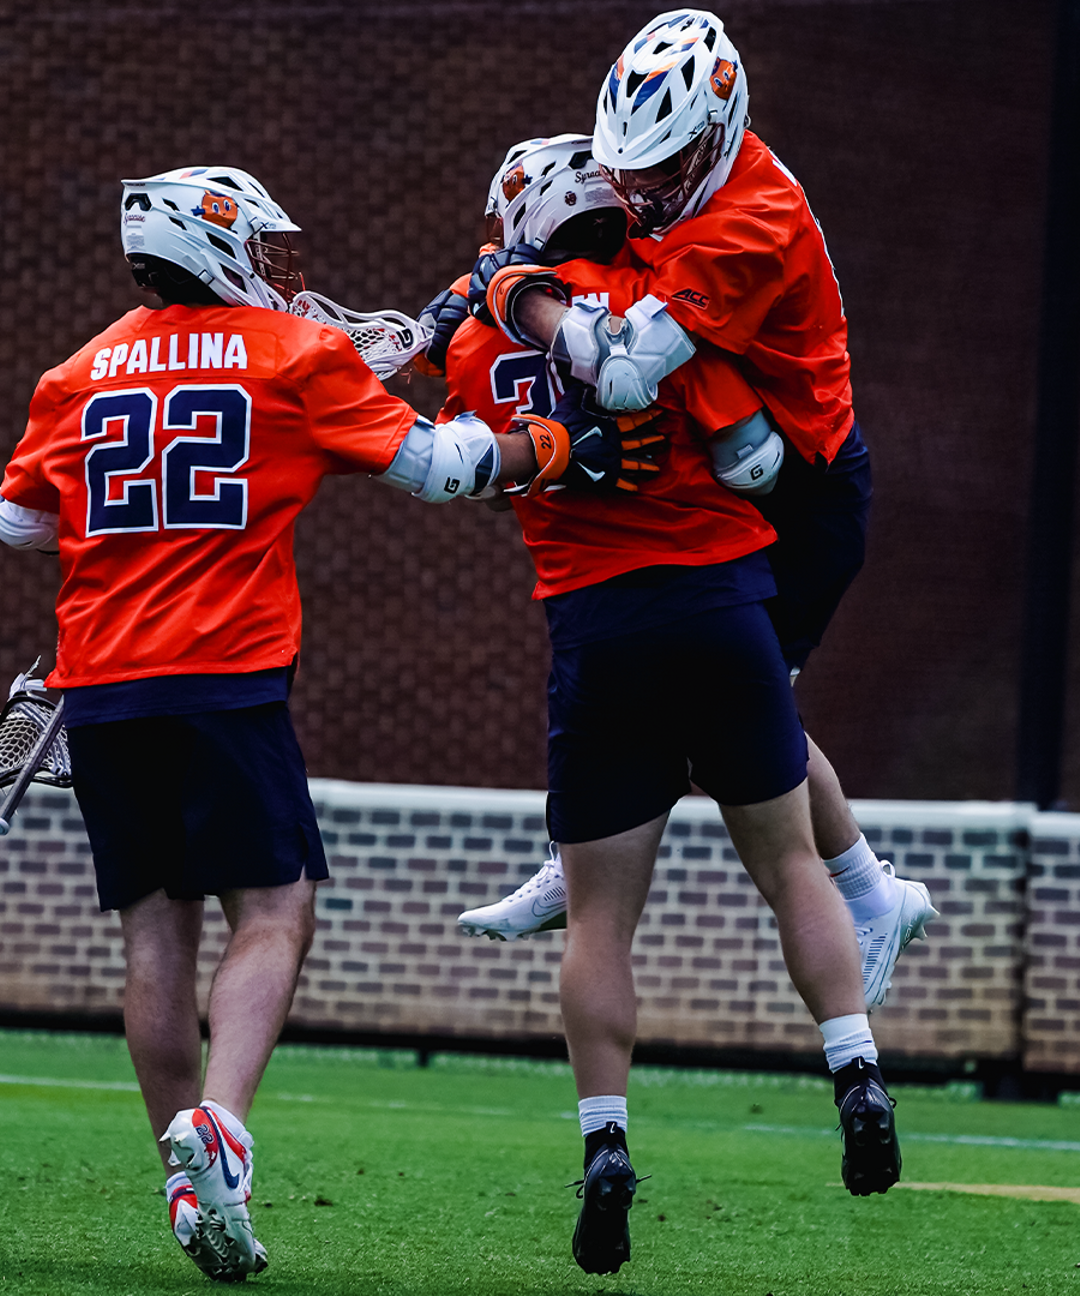 Image related to No. 9/7 Syracuse Hangs On To Beat North Carolina